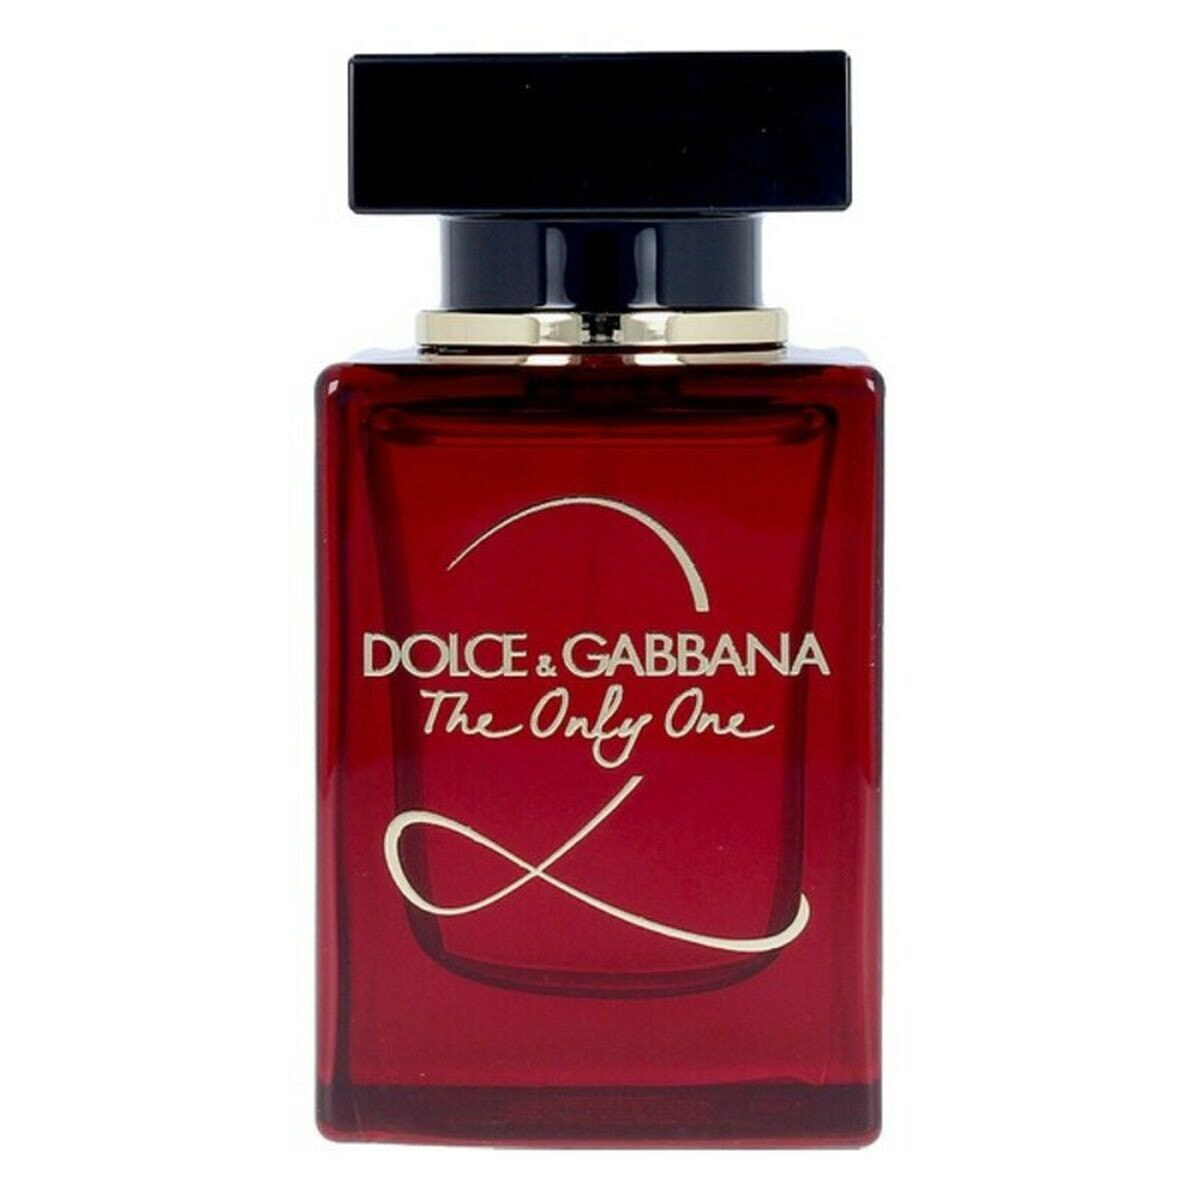 Духи dolce only one. Dolce Gabbana the only one 2 100 мл. Духи Дольче Габбана the only one 100 мл. Дольче Габбана the only 50 мл. Dolce & Gabbana the only one EDP 50 ml.